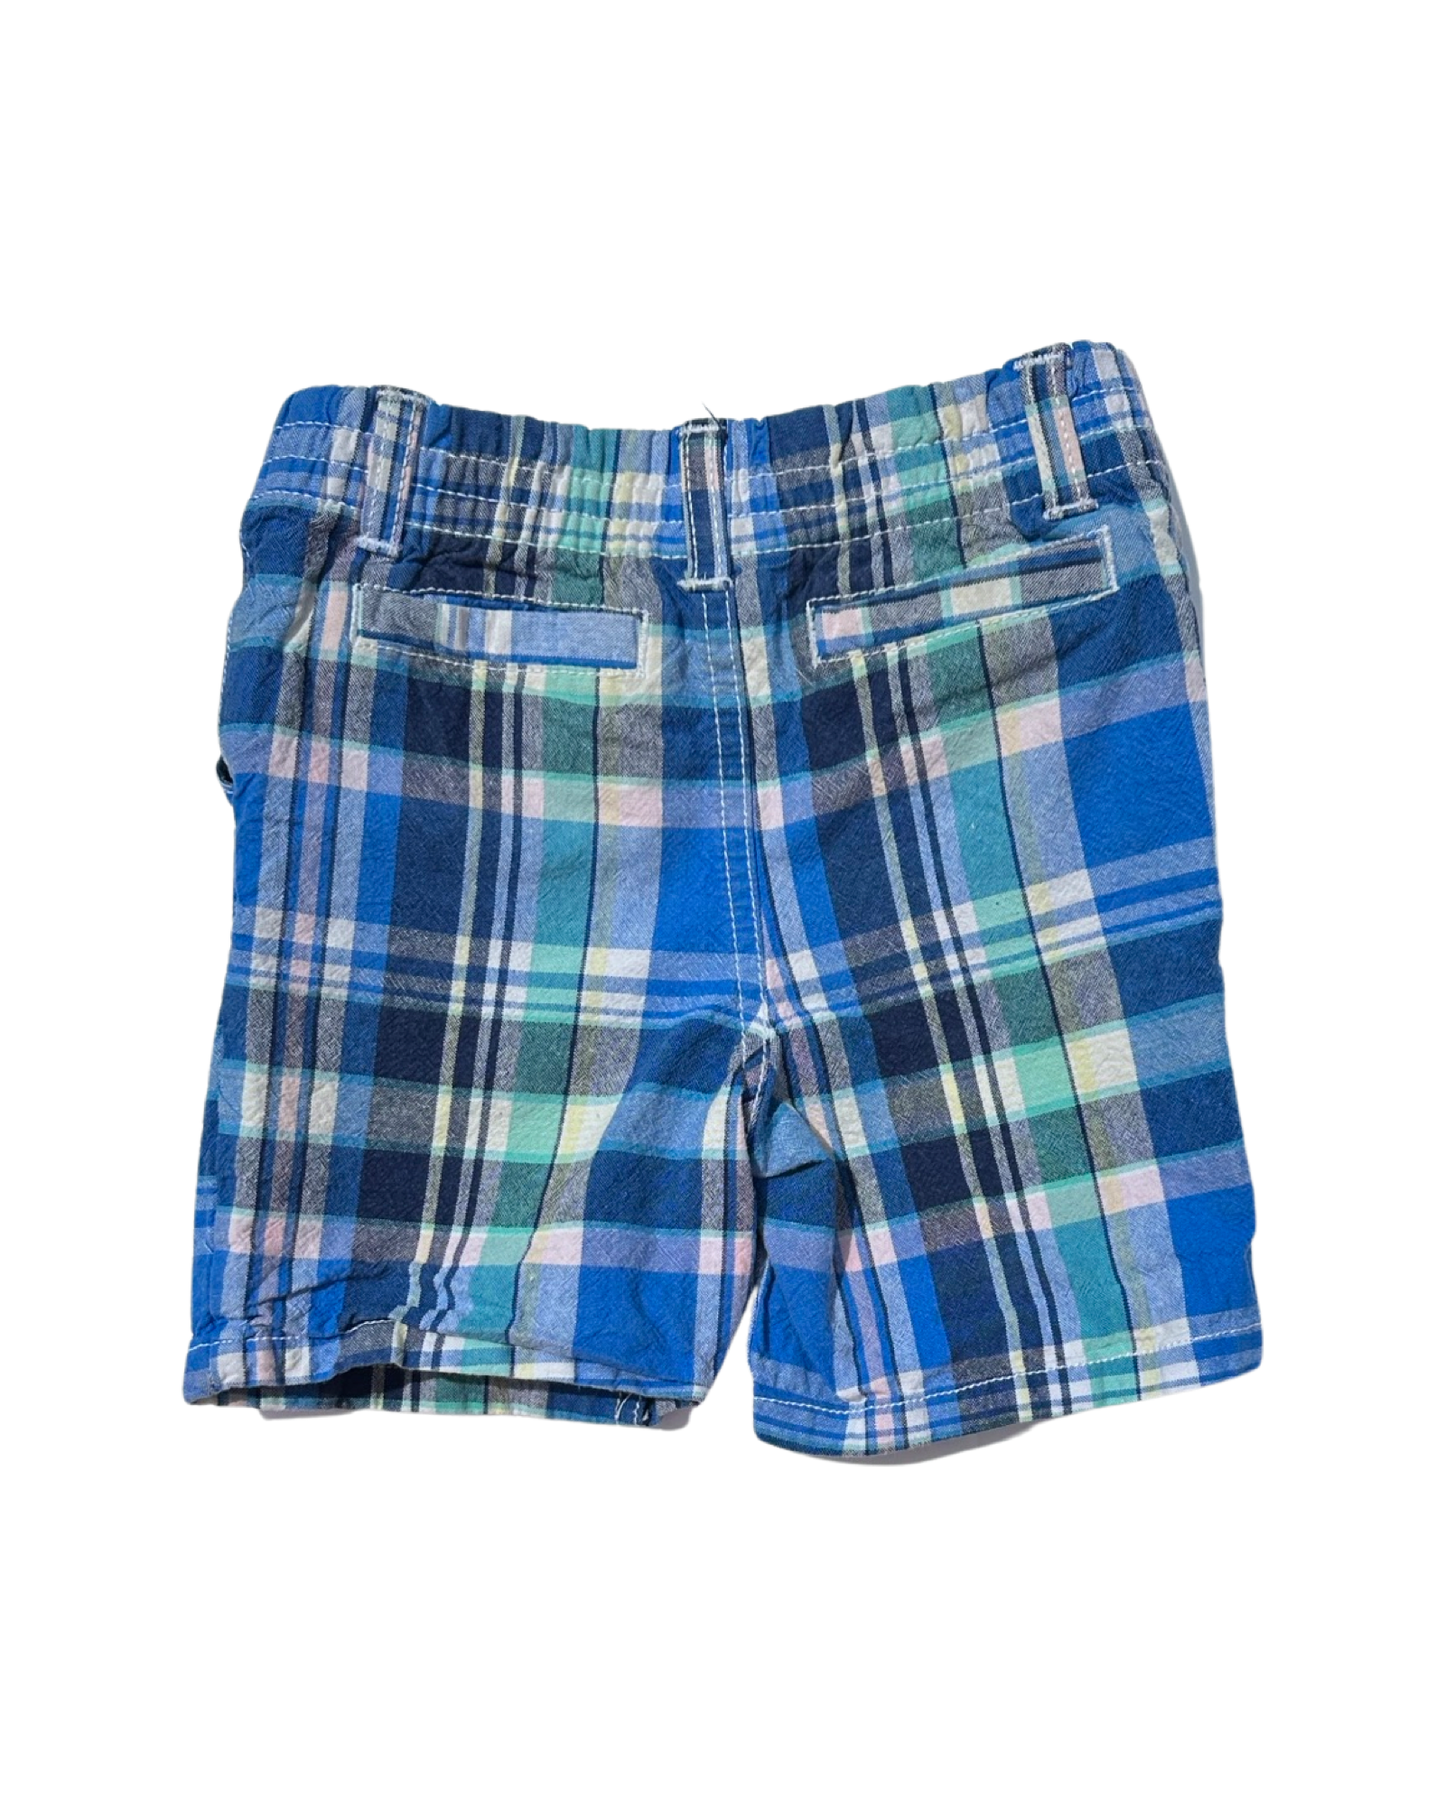 Tommy Hilfiger checked cotton shorts (size 18-24mths)